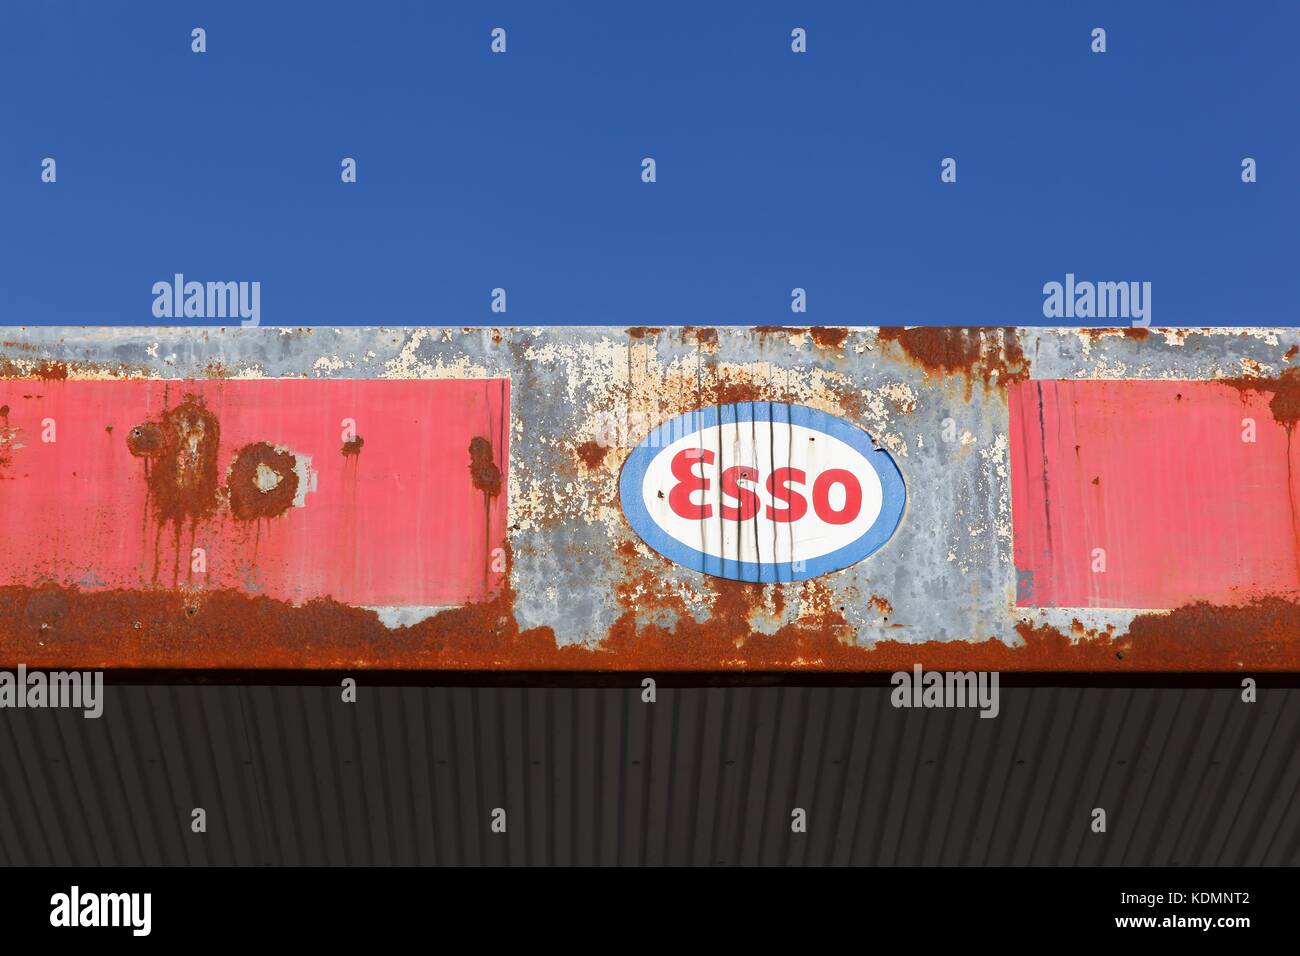 Aarhus, Denmark - October 28, 2015: Old and vintage logo of Esso on an abandoned gas station Stock Photo